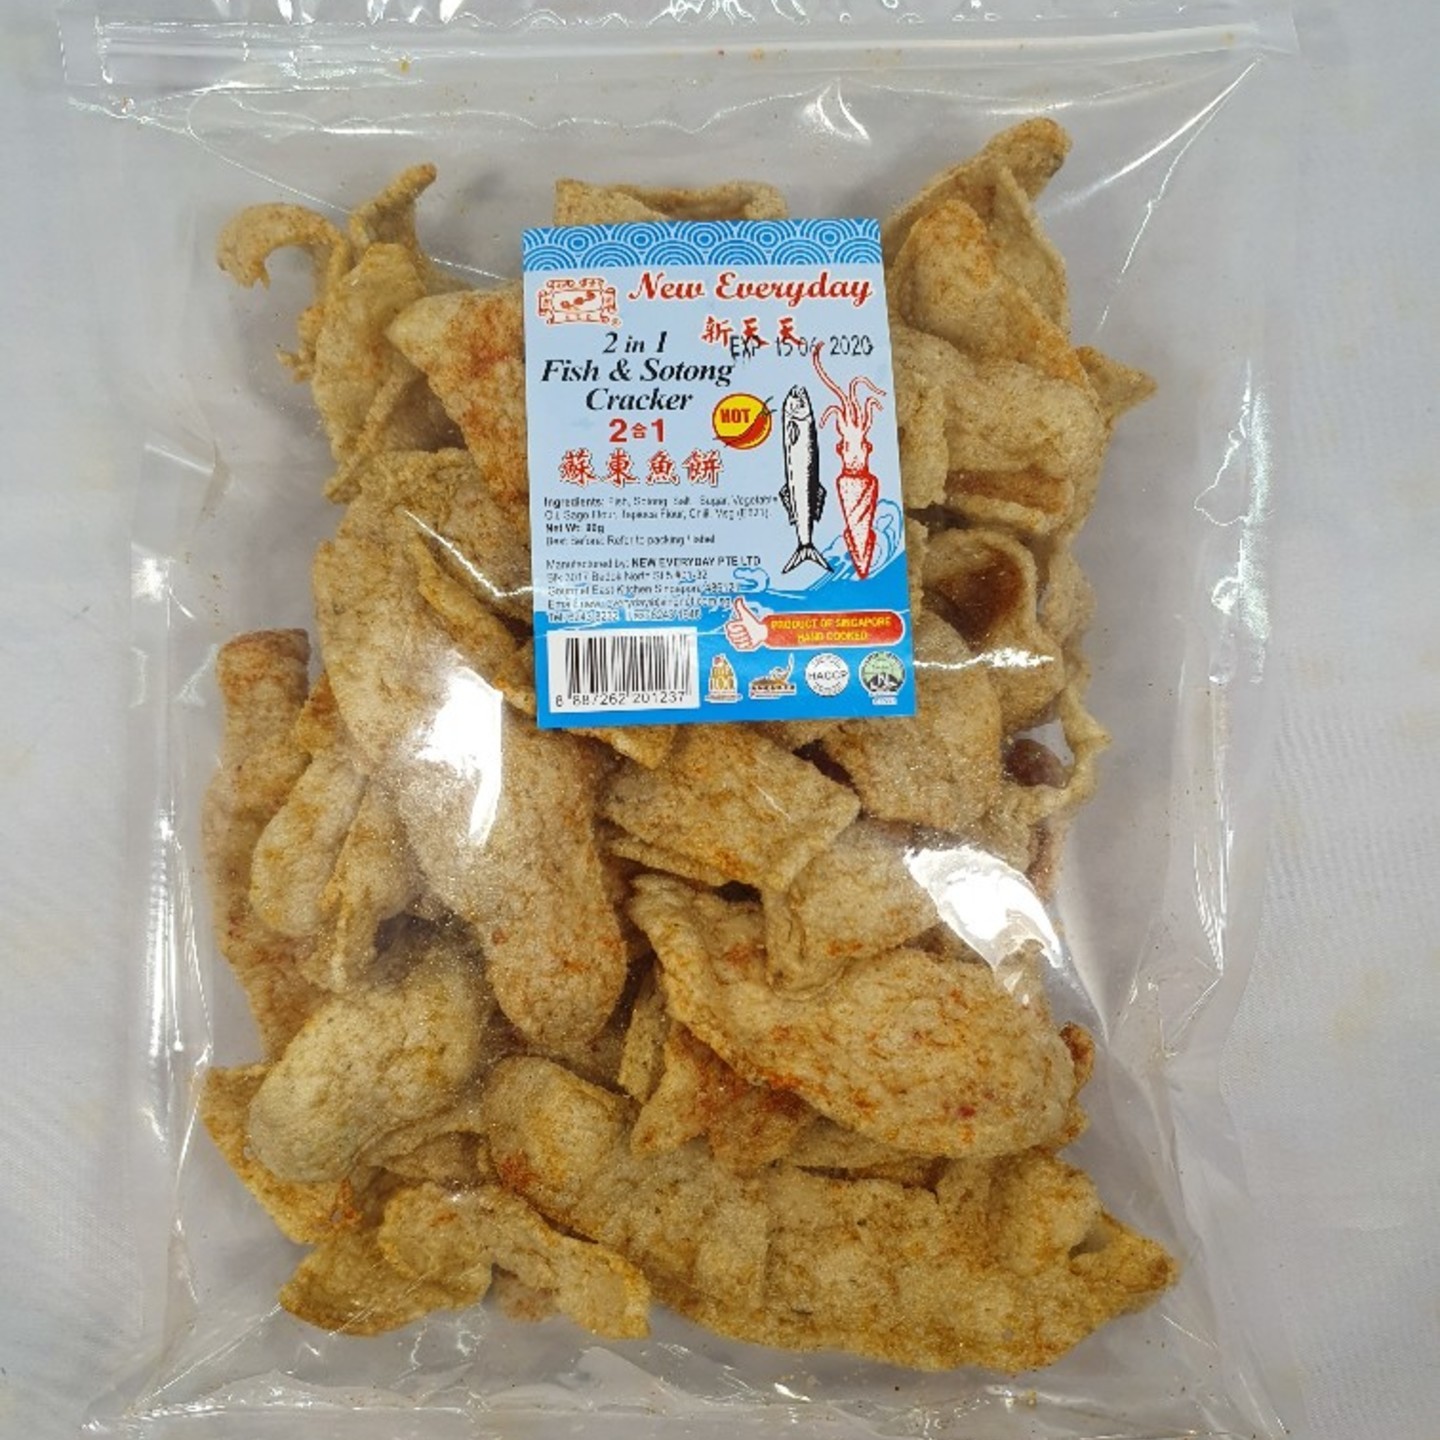 Fish & Sotong Cracker Spicy - NED